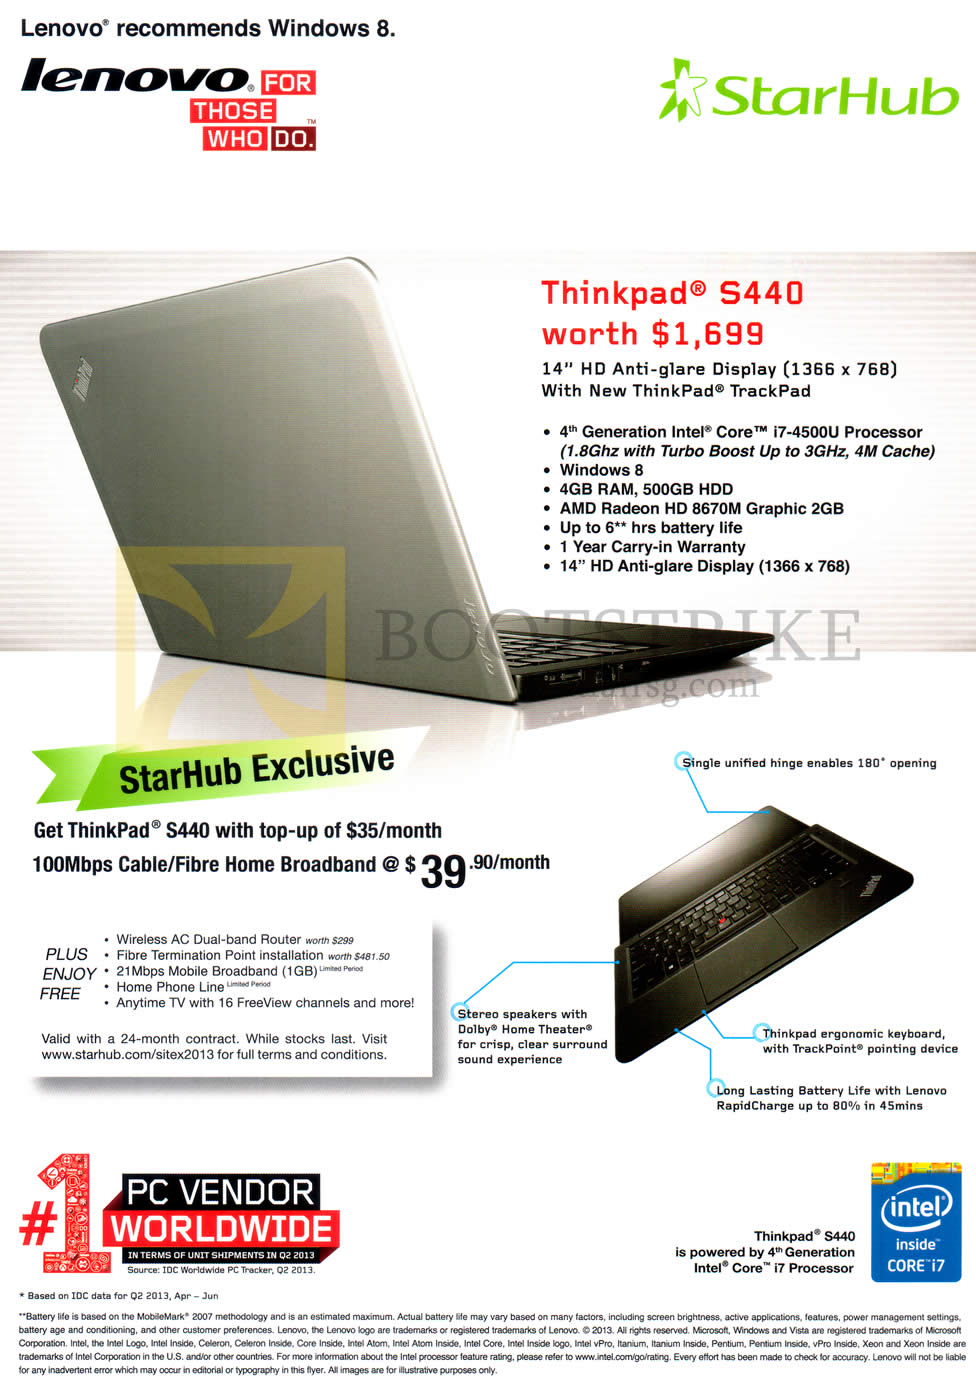 SITEX 2013 price list image brochure of Starhub Fibre Broadband 100Mbps 39.90 Lenovo Notebook Thinkpad S440 Specifications, Features